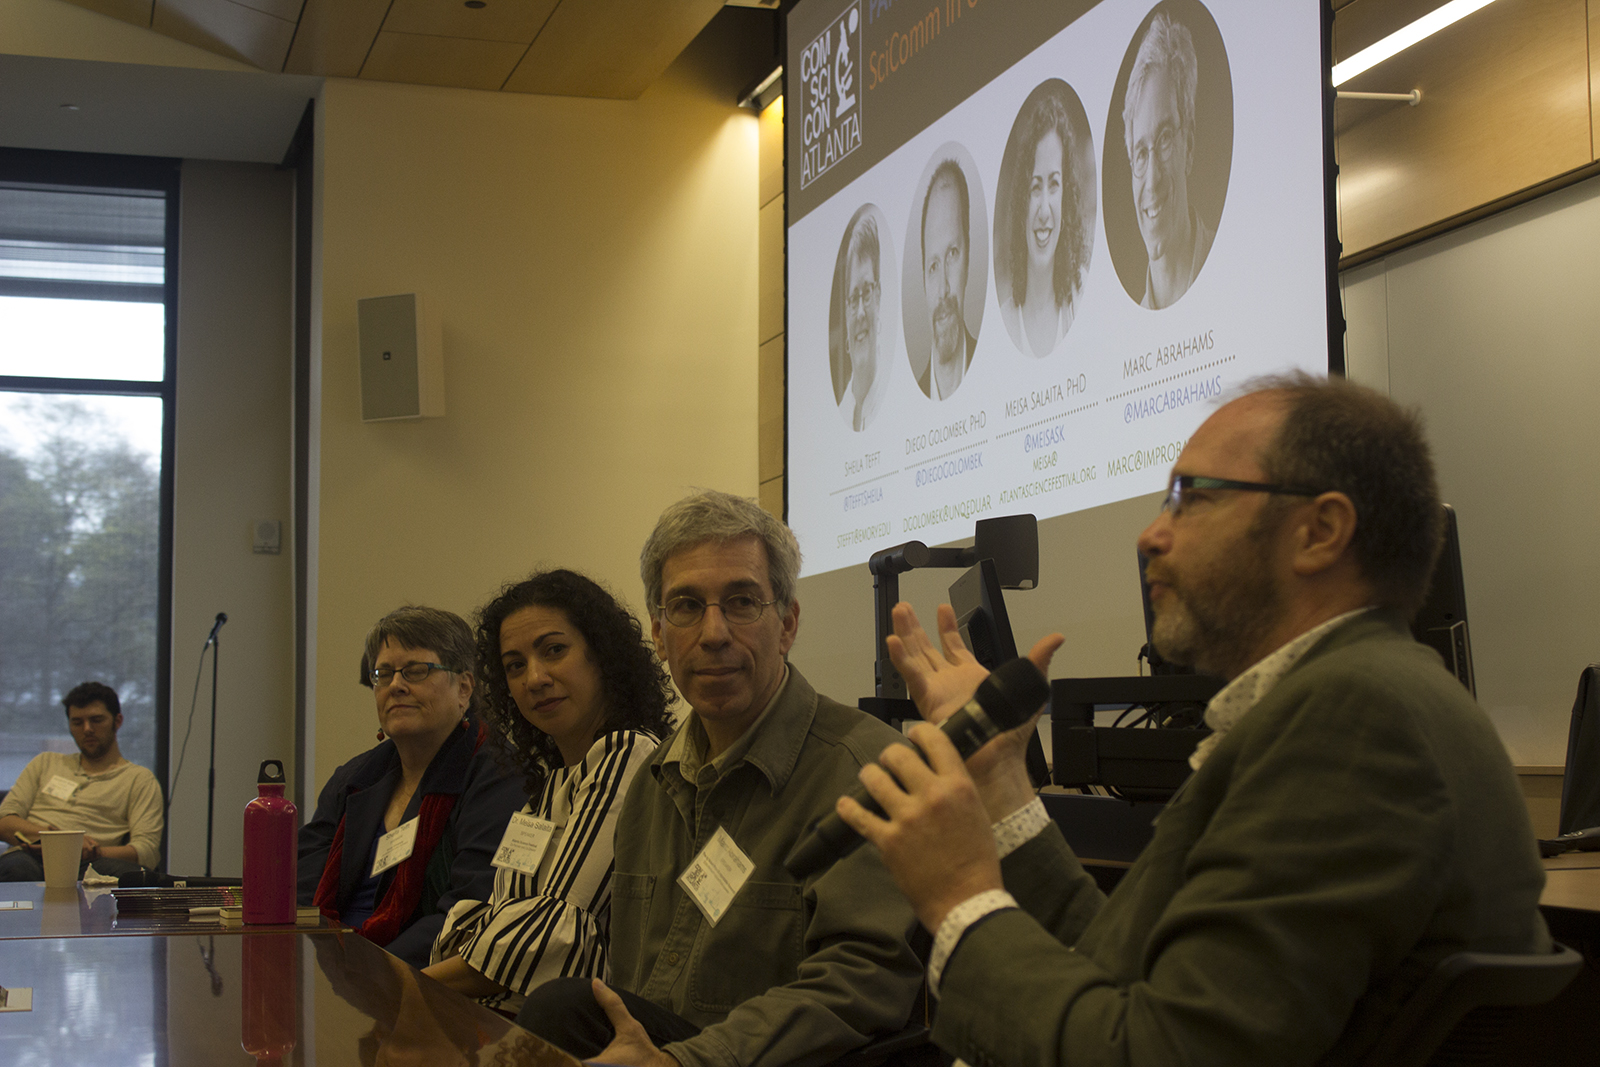 Panelists engaged in a discussion regarding creative platforms for science communication (pictured from left to right: Sheila Tefft, Dr. Meisa Salaita, Marc Abrahams, and Dr. Diego Golombek)

Photos by Anzar Abbas and Carleen Sabusap